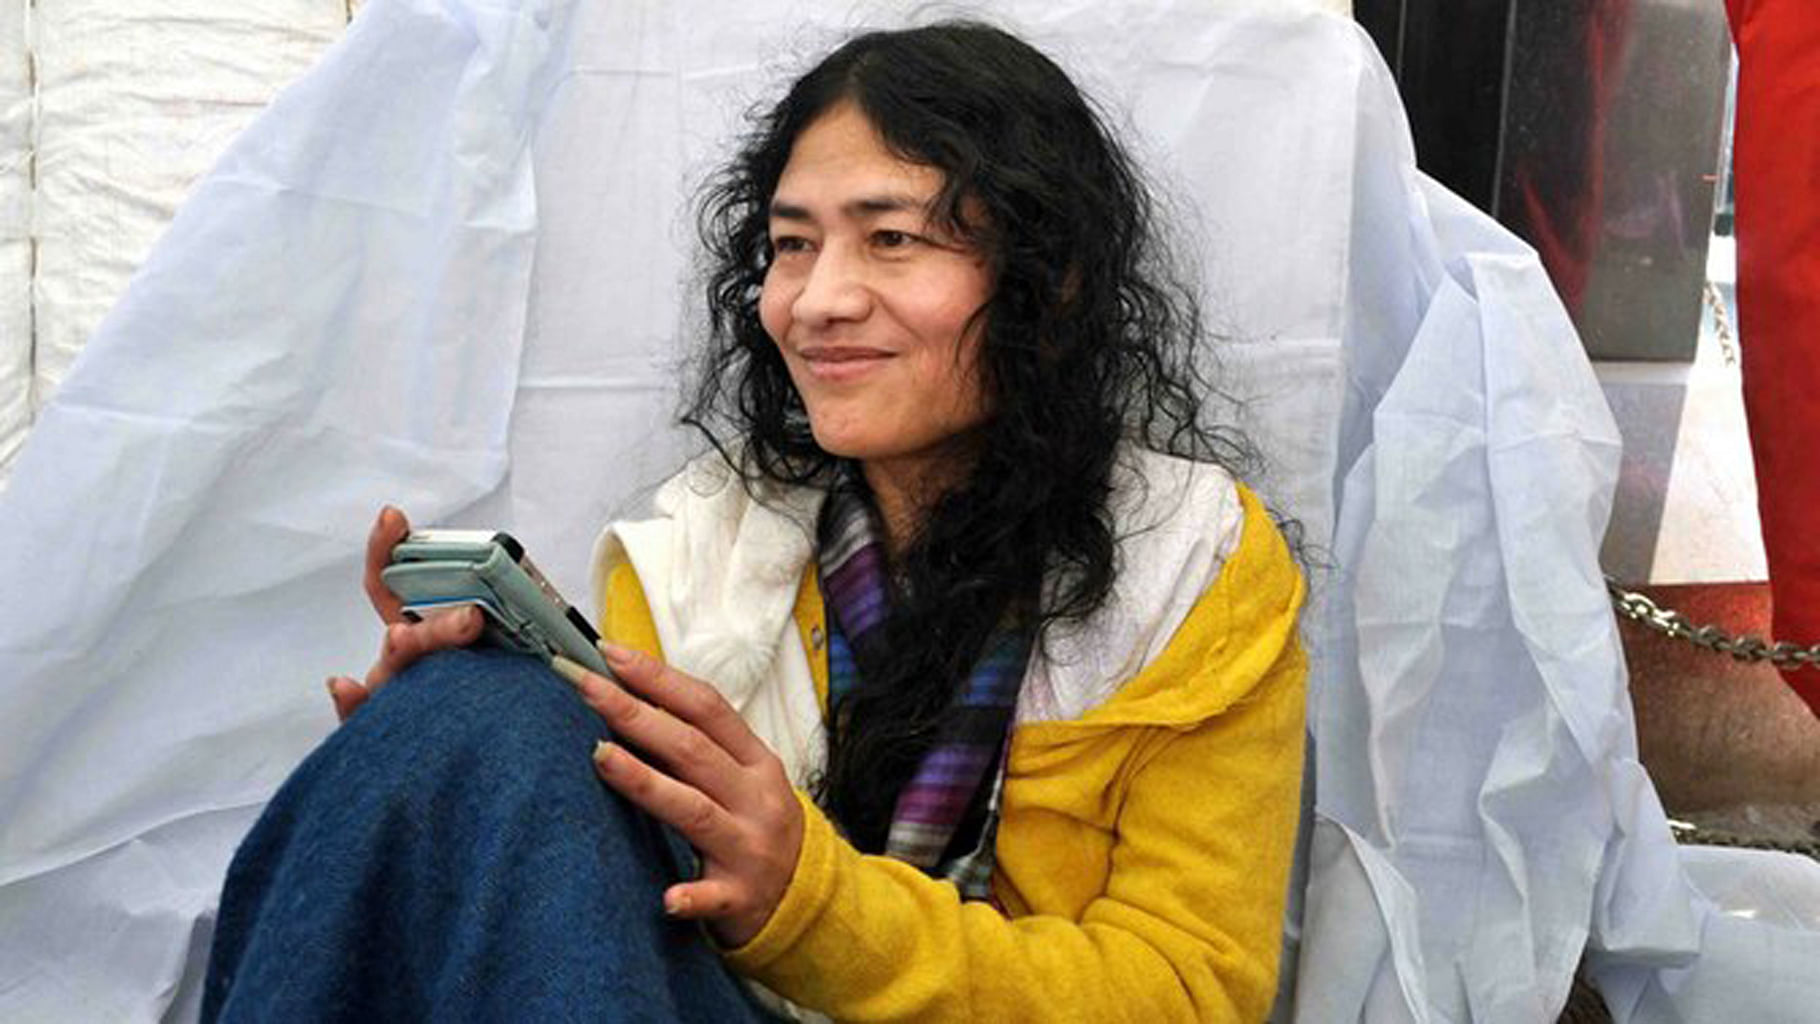 Irom Sharmila, who had been on a hunger fast against the AFSPA  for the last 16 years, broke her fast on Tuesday. (Photo: The Quint/ Sunzu Bachaspatimayum)